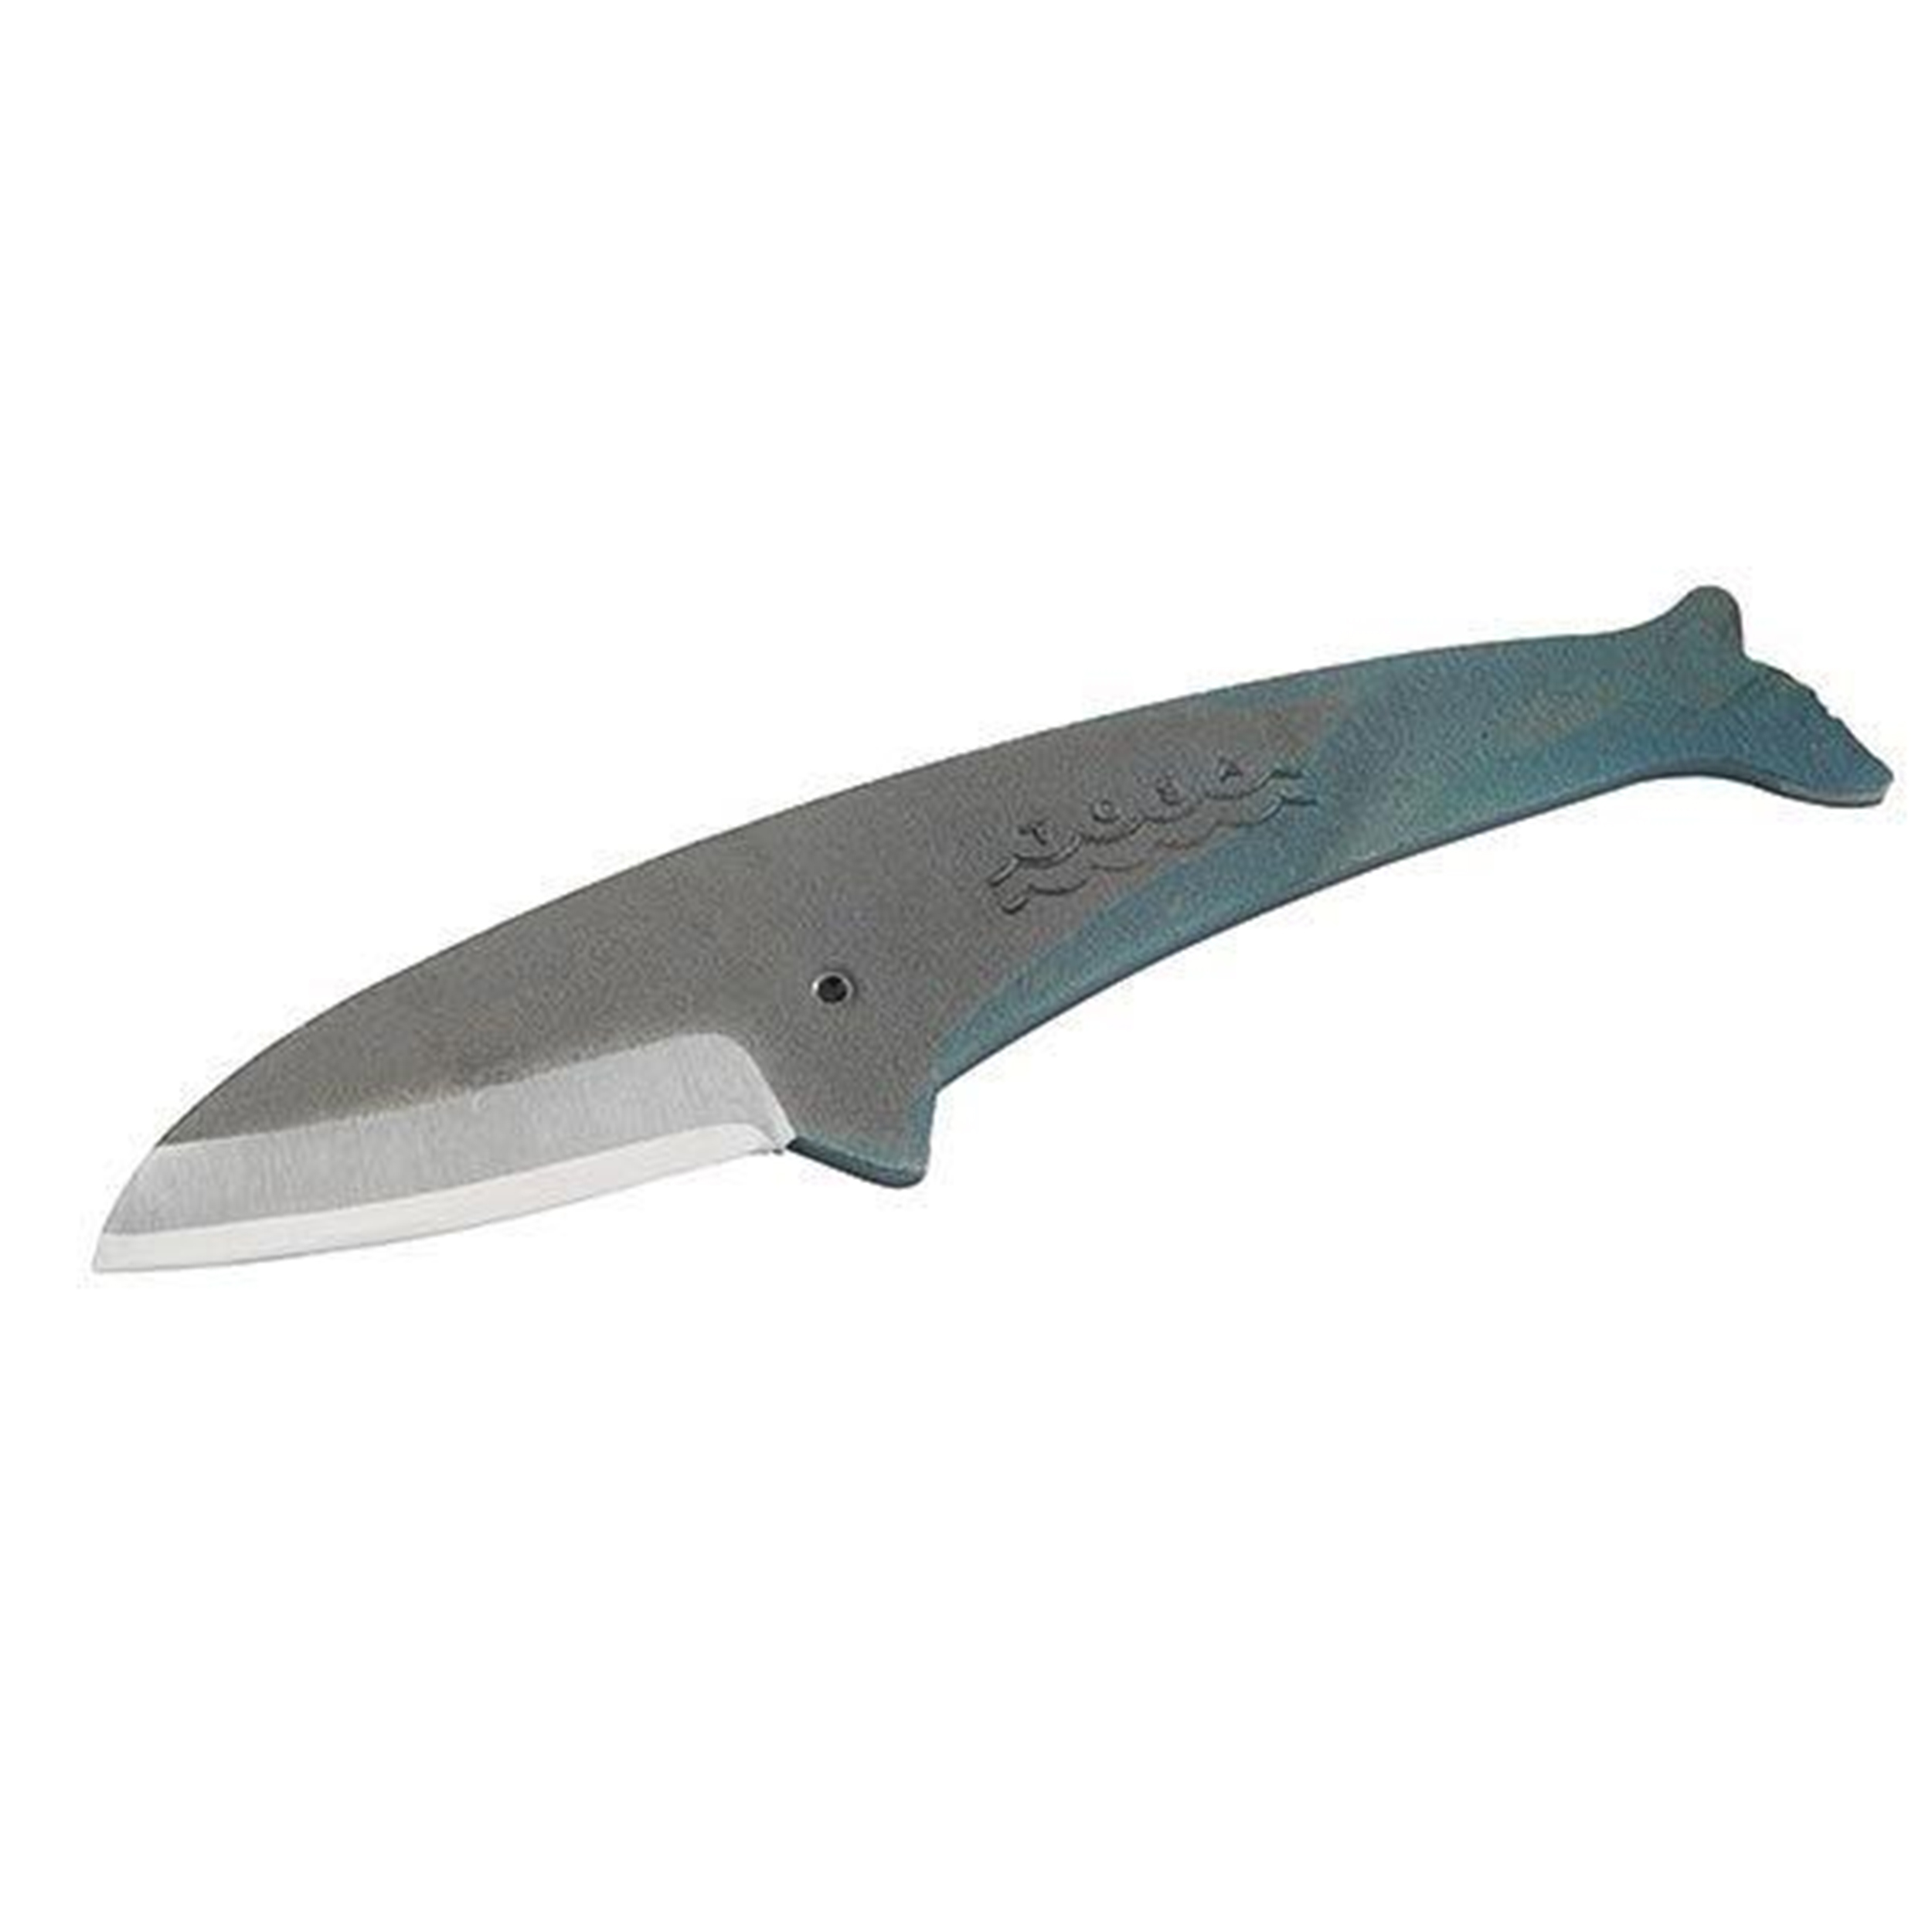 Finback Whale, Hand-forged, Traditional Pencil Sharpening Knife